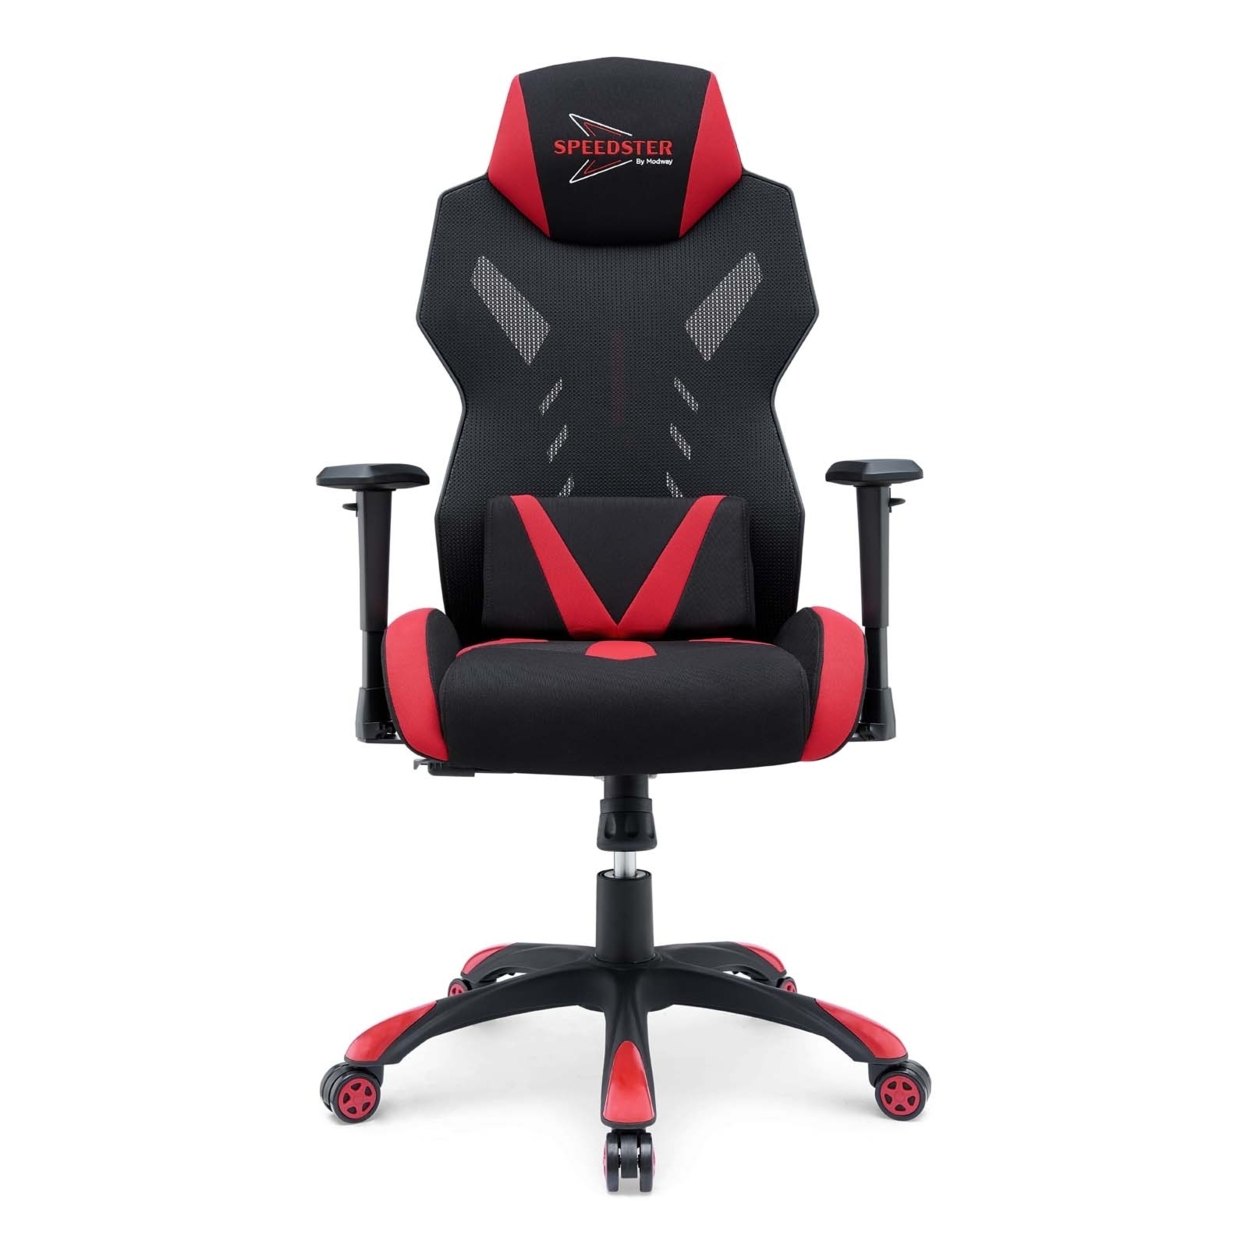 Modway Speedster Modern Mesh Fabric Gaming Computer Chair in Black/Red - image 3 of 8